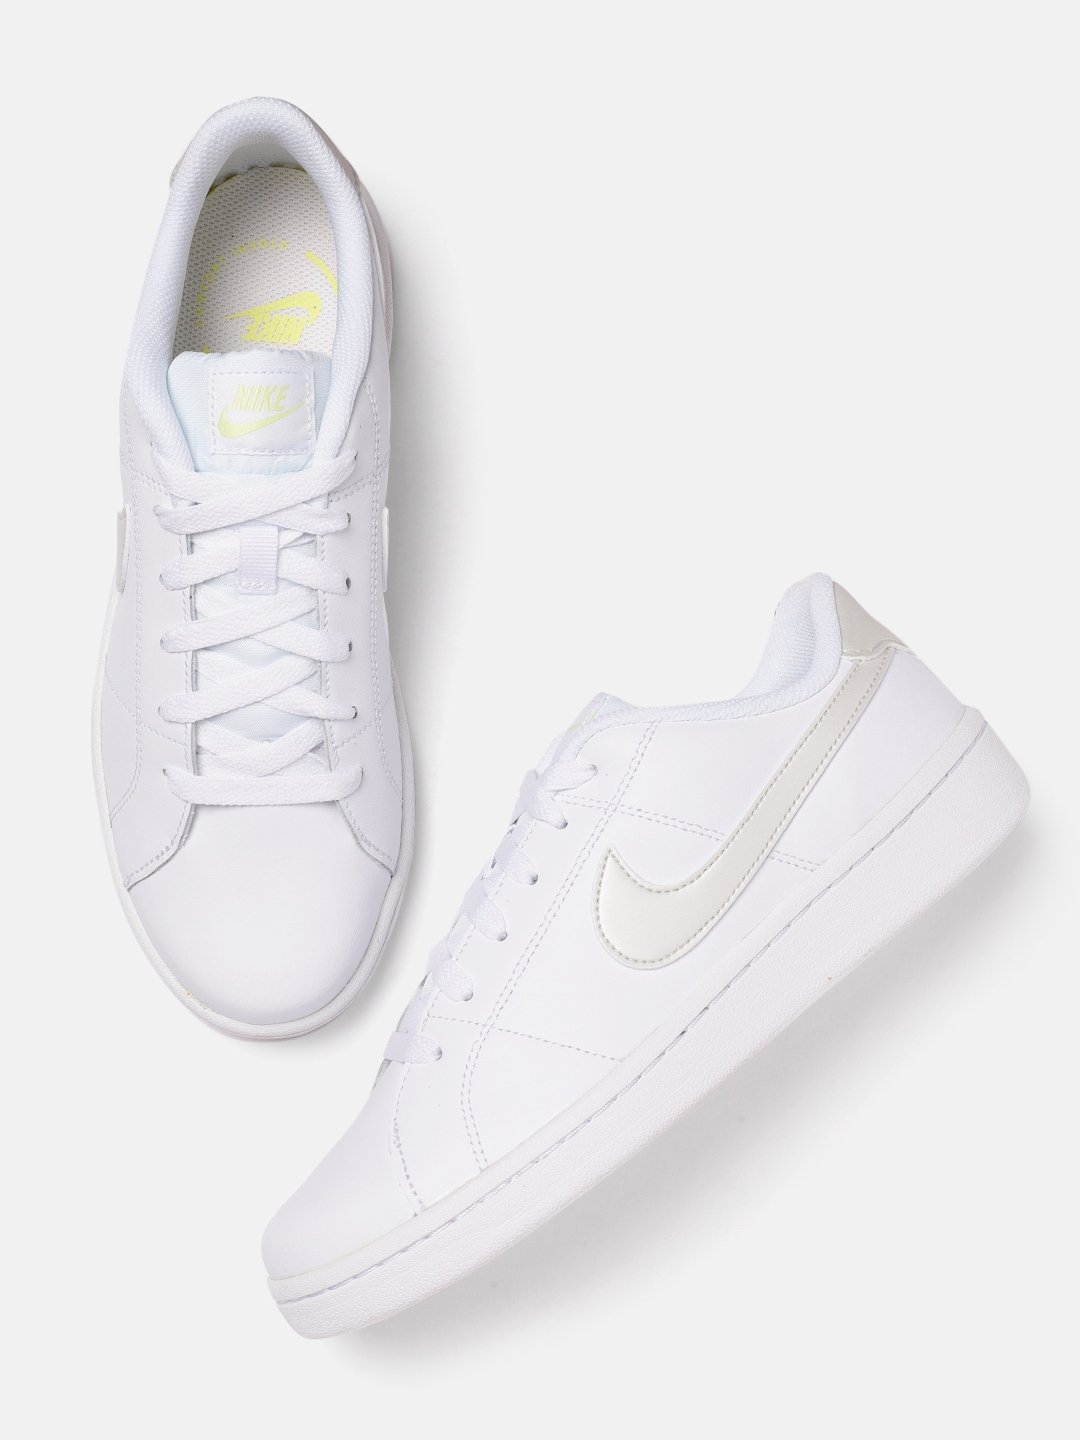 Buy Nike Women White Solid COURT ROYALE 2 Leather Sneakers Casual